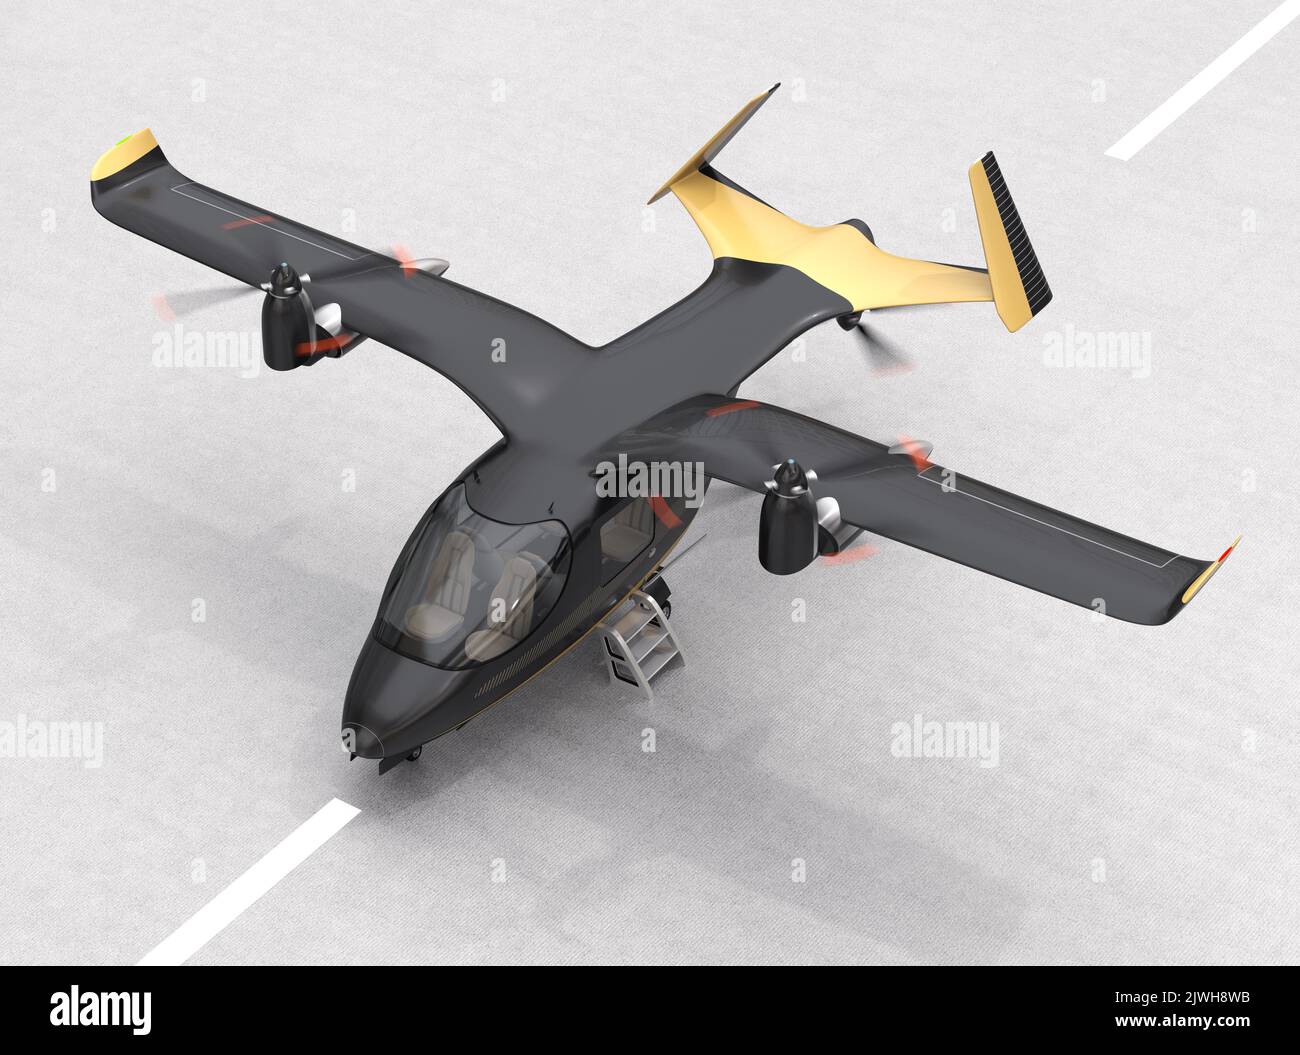 Electric VTOL passenger aircraft prepare to takeoff on the ground. Urban Passenger Mobility concept. 3D rendering image. Stock Photo